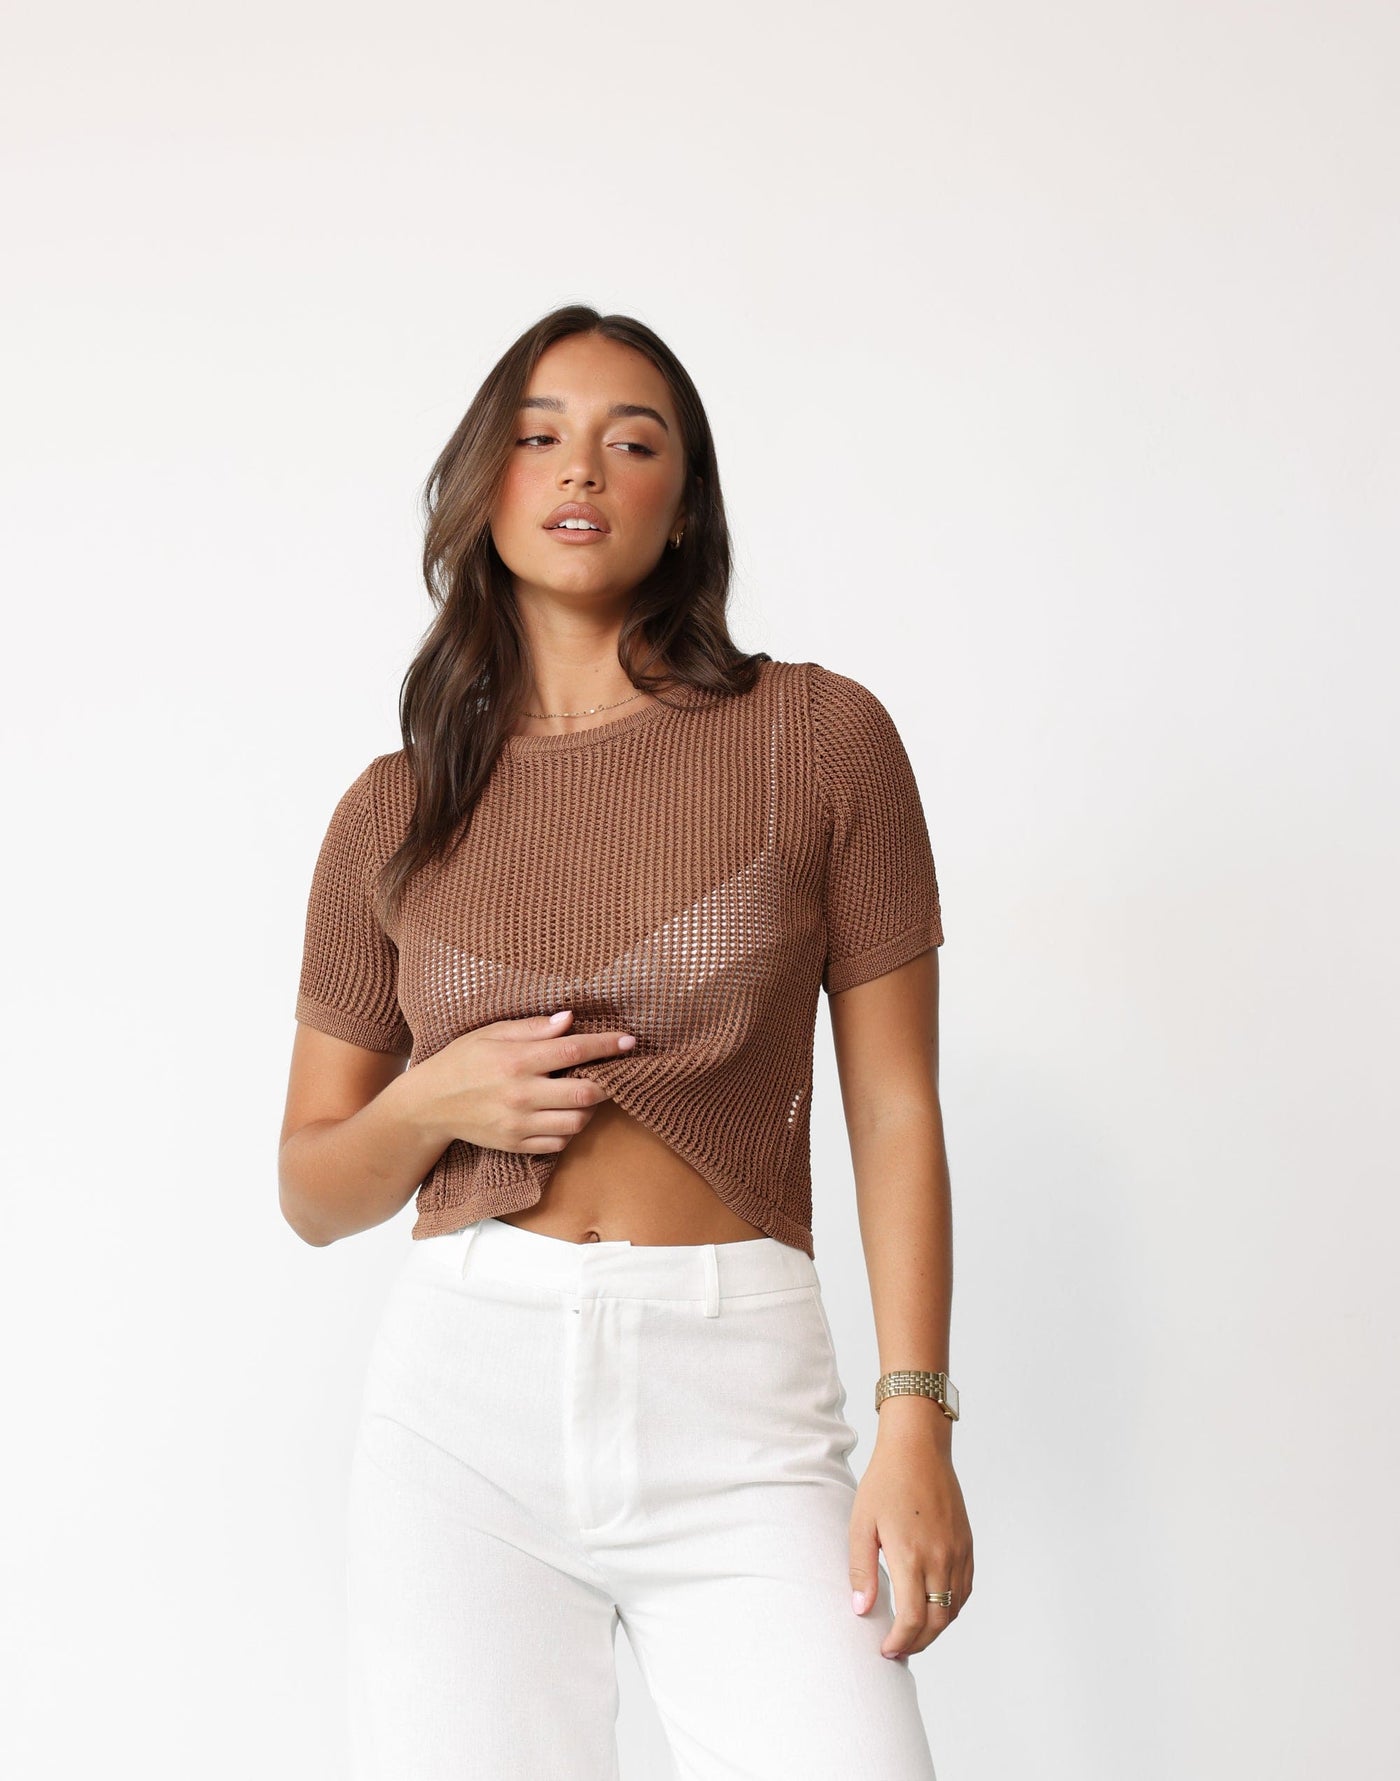 Niana Top (Mocha) - Cropped Style Short Sleeve Round Neck Top - Women's Top - Charcoal Clothing